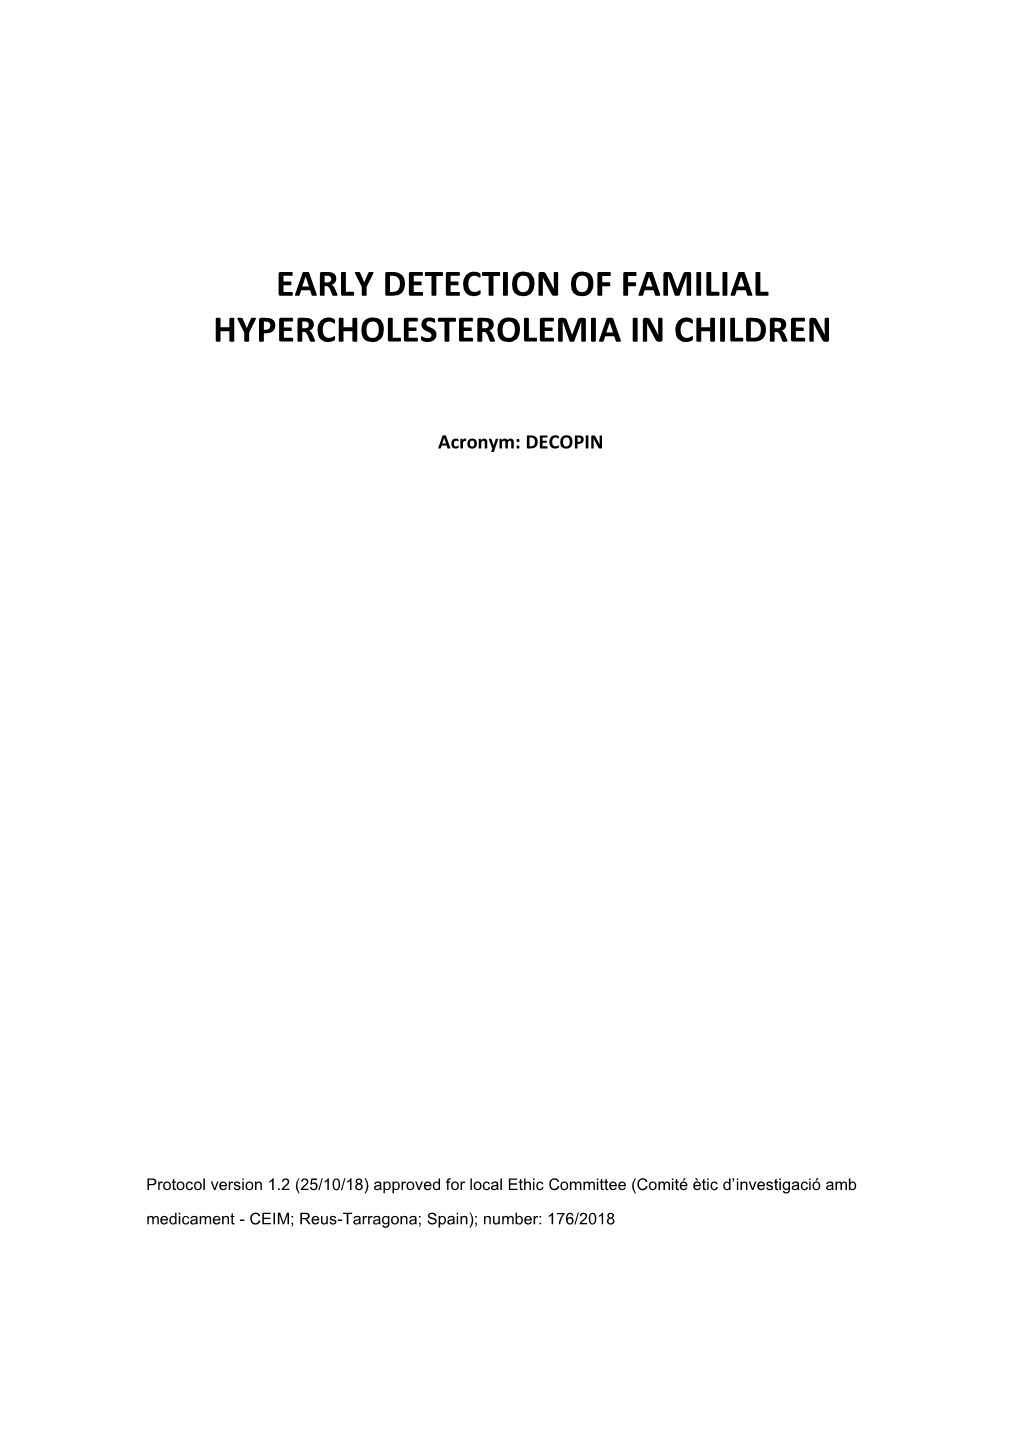 Early Detection of Familial Hypercholesterolemia in Children